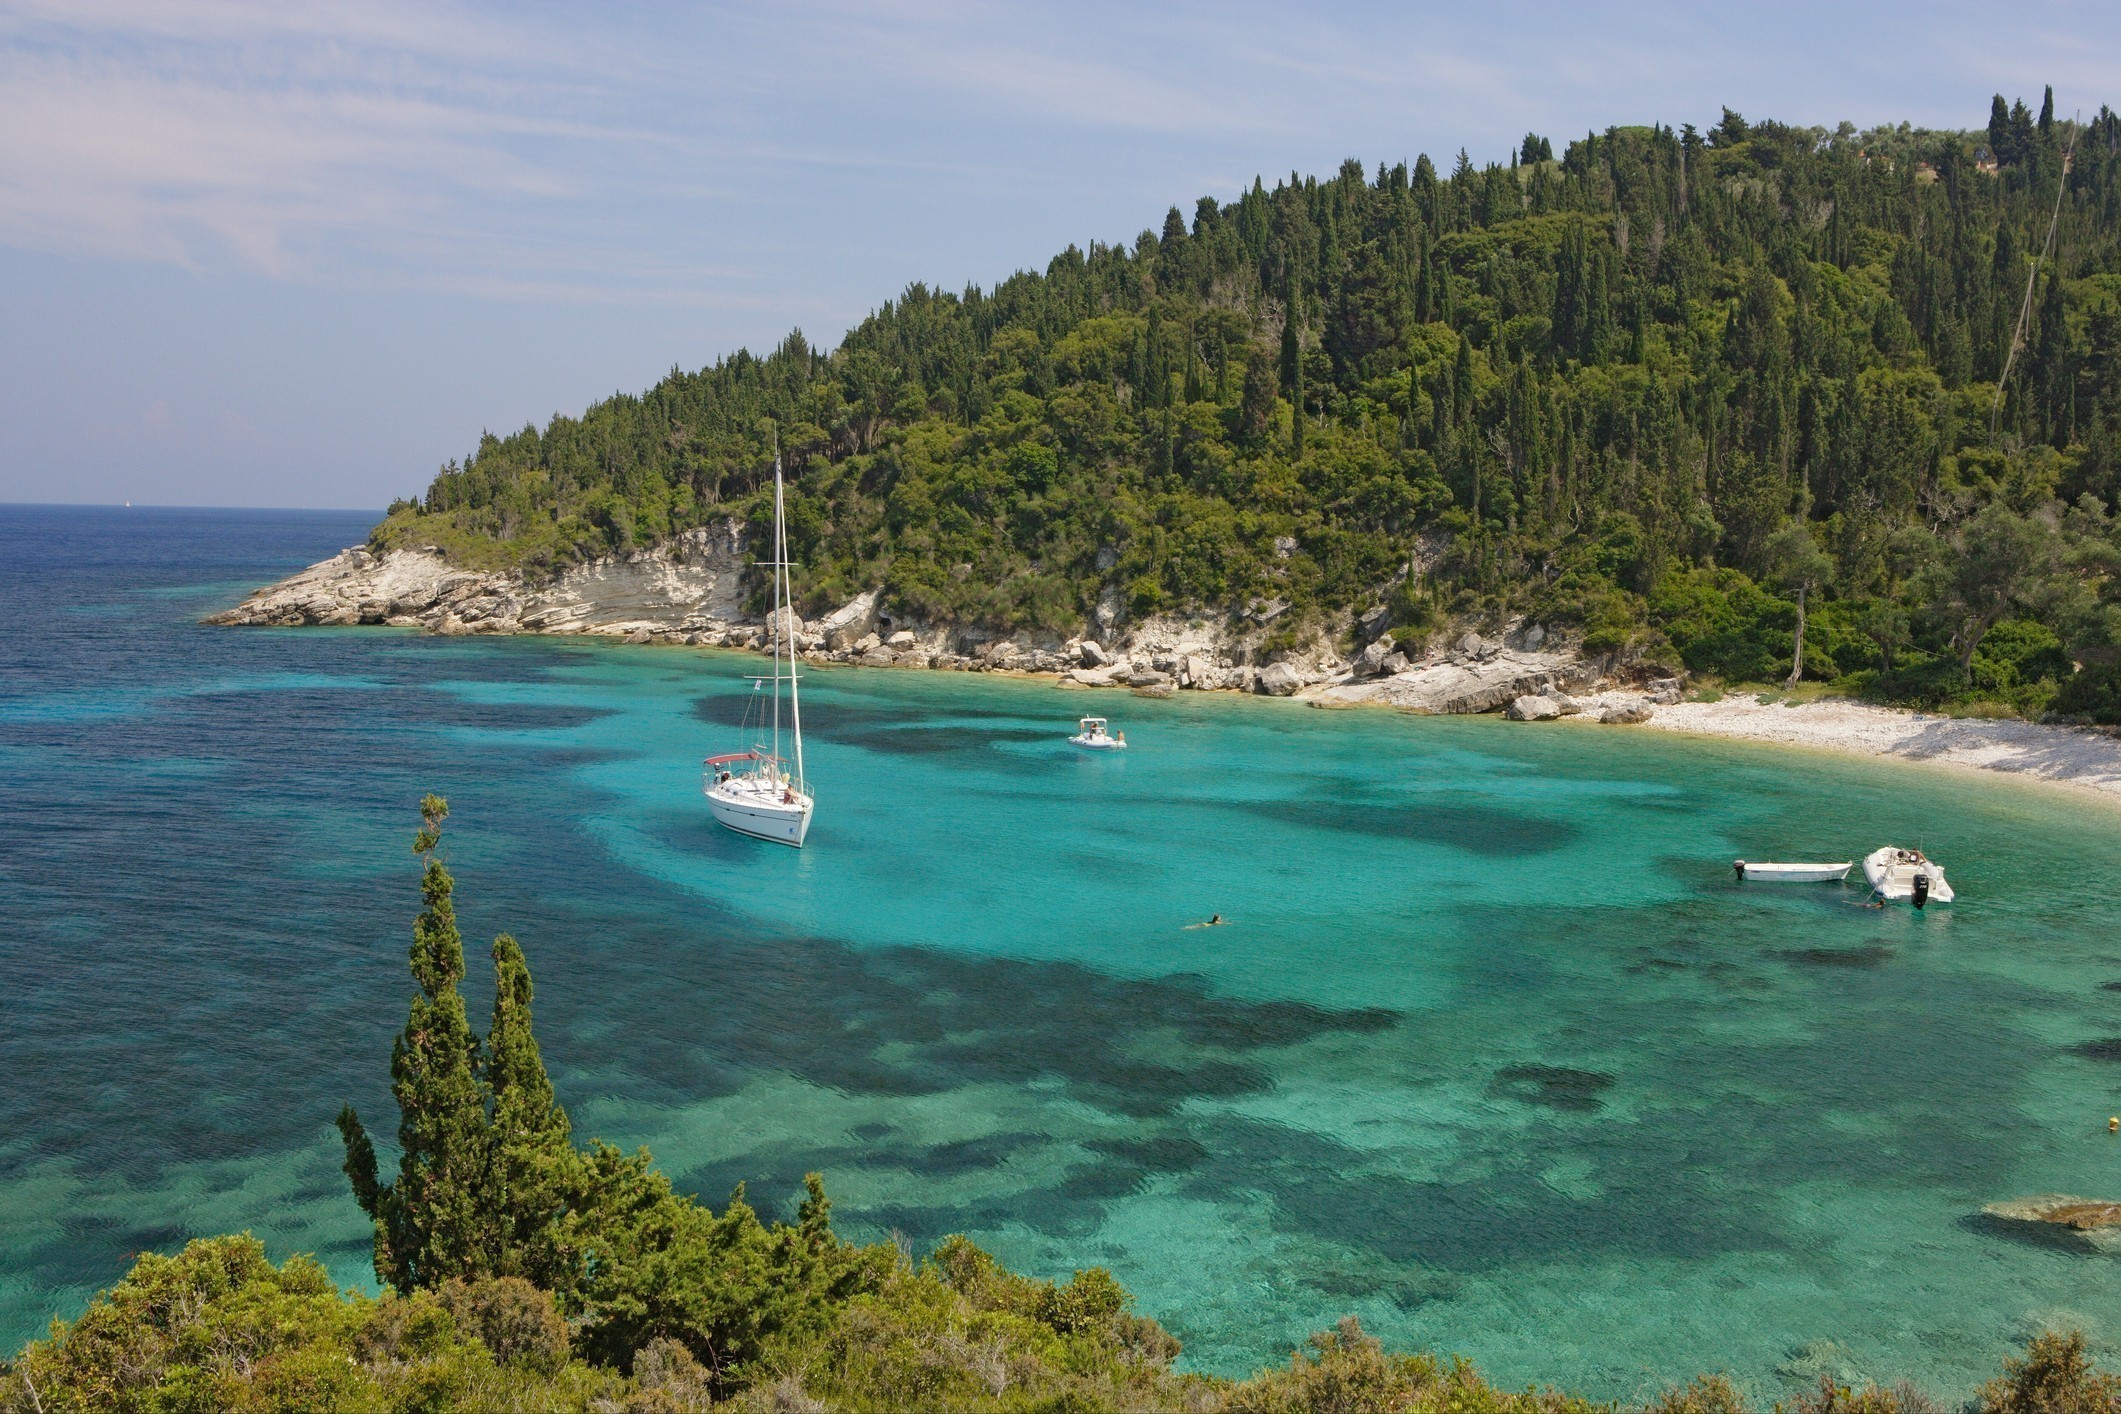 Frenzy for Paxos – Fixed at 100% occupancy after Maestro at Papakaliatis